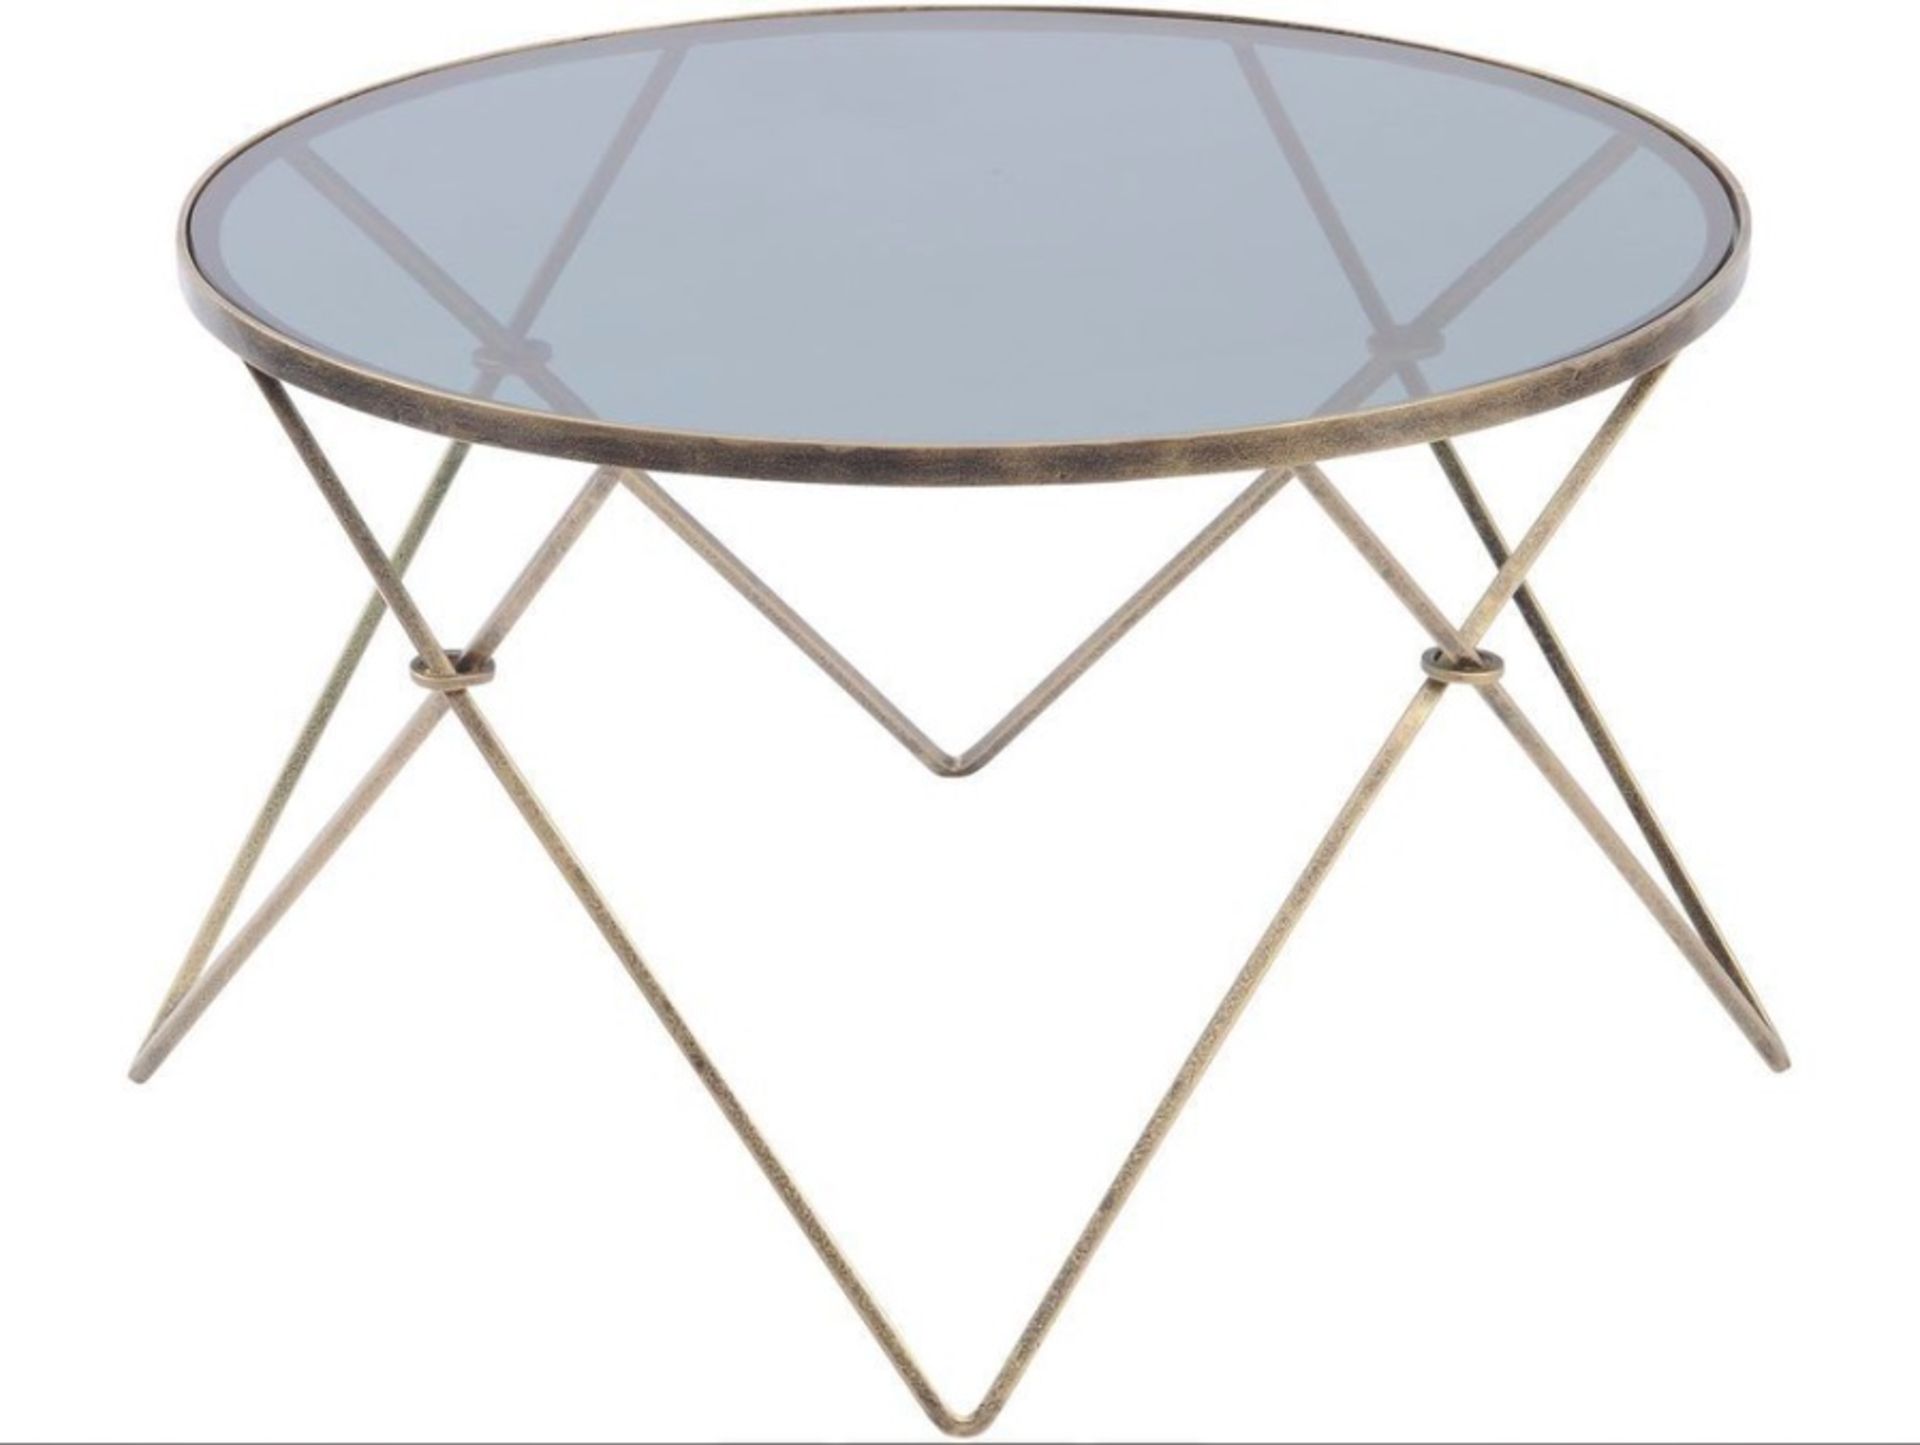 Conti Gold and Smoked Glass Coffee Table The sharp angles and dainty detailing of this antique